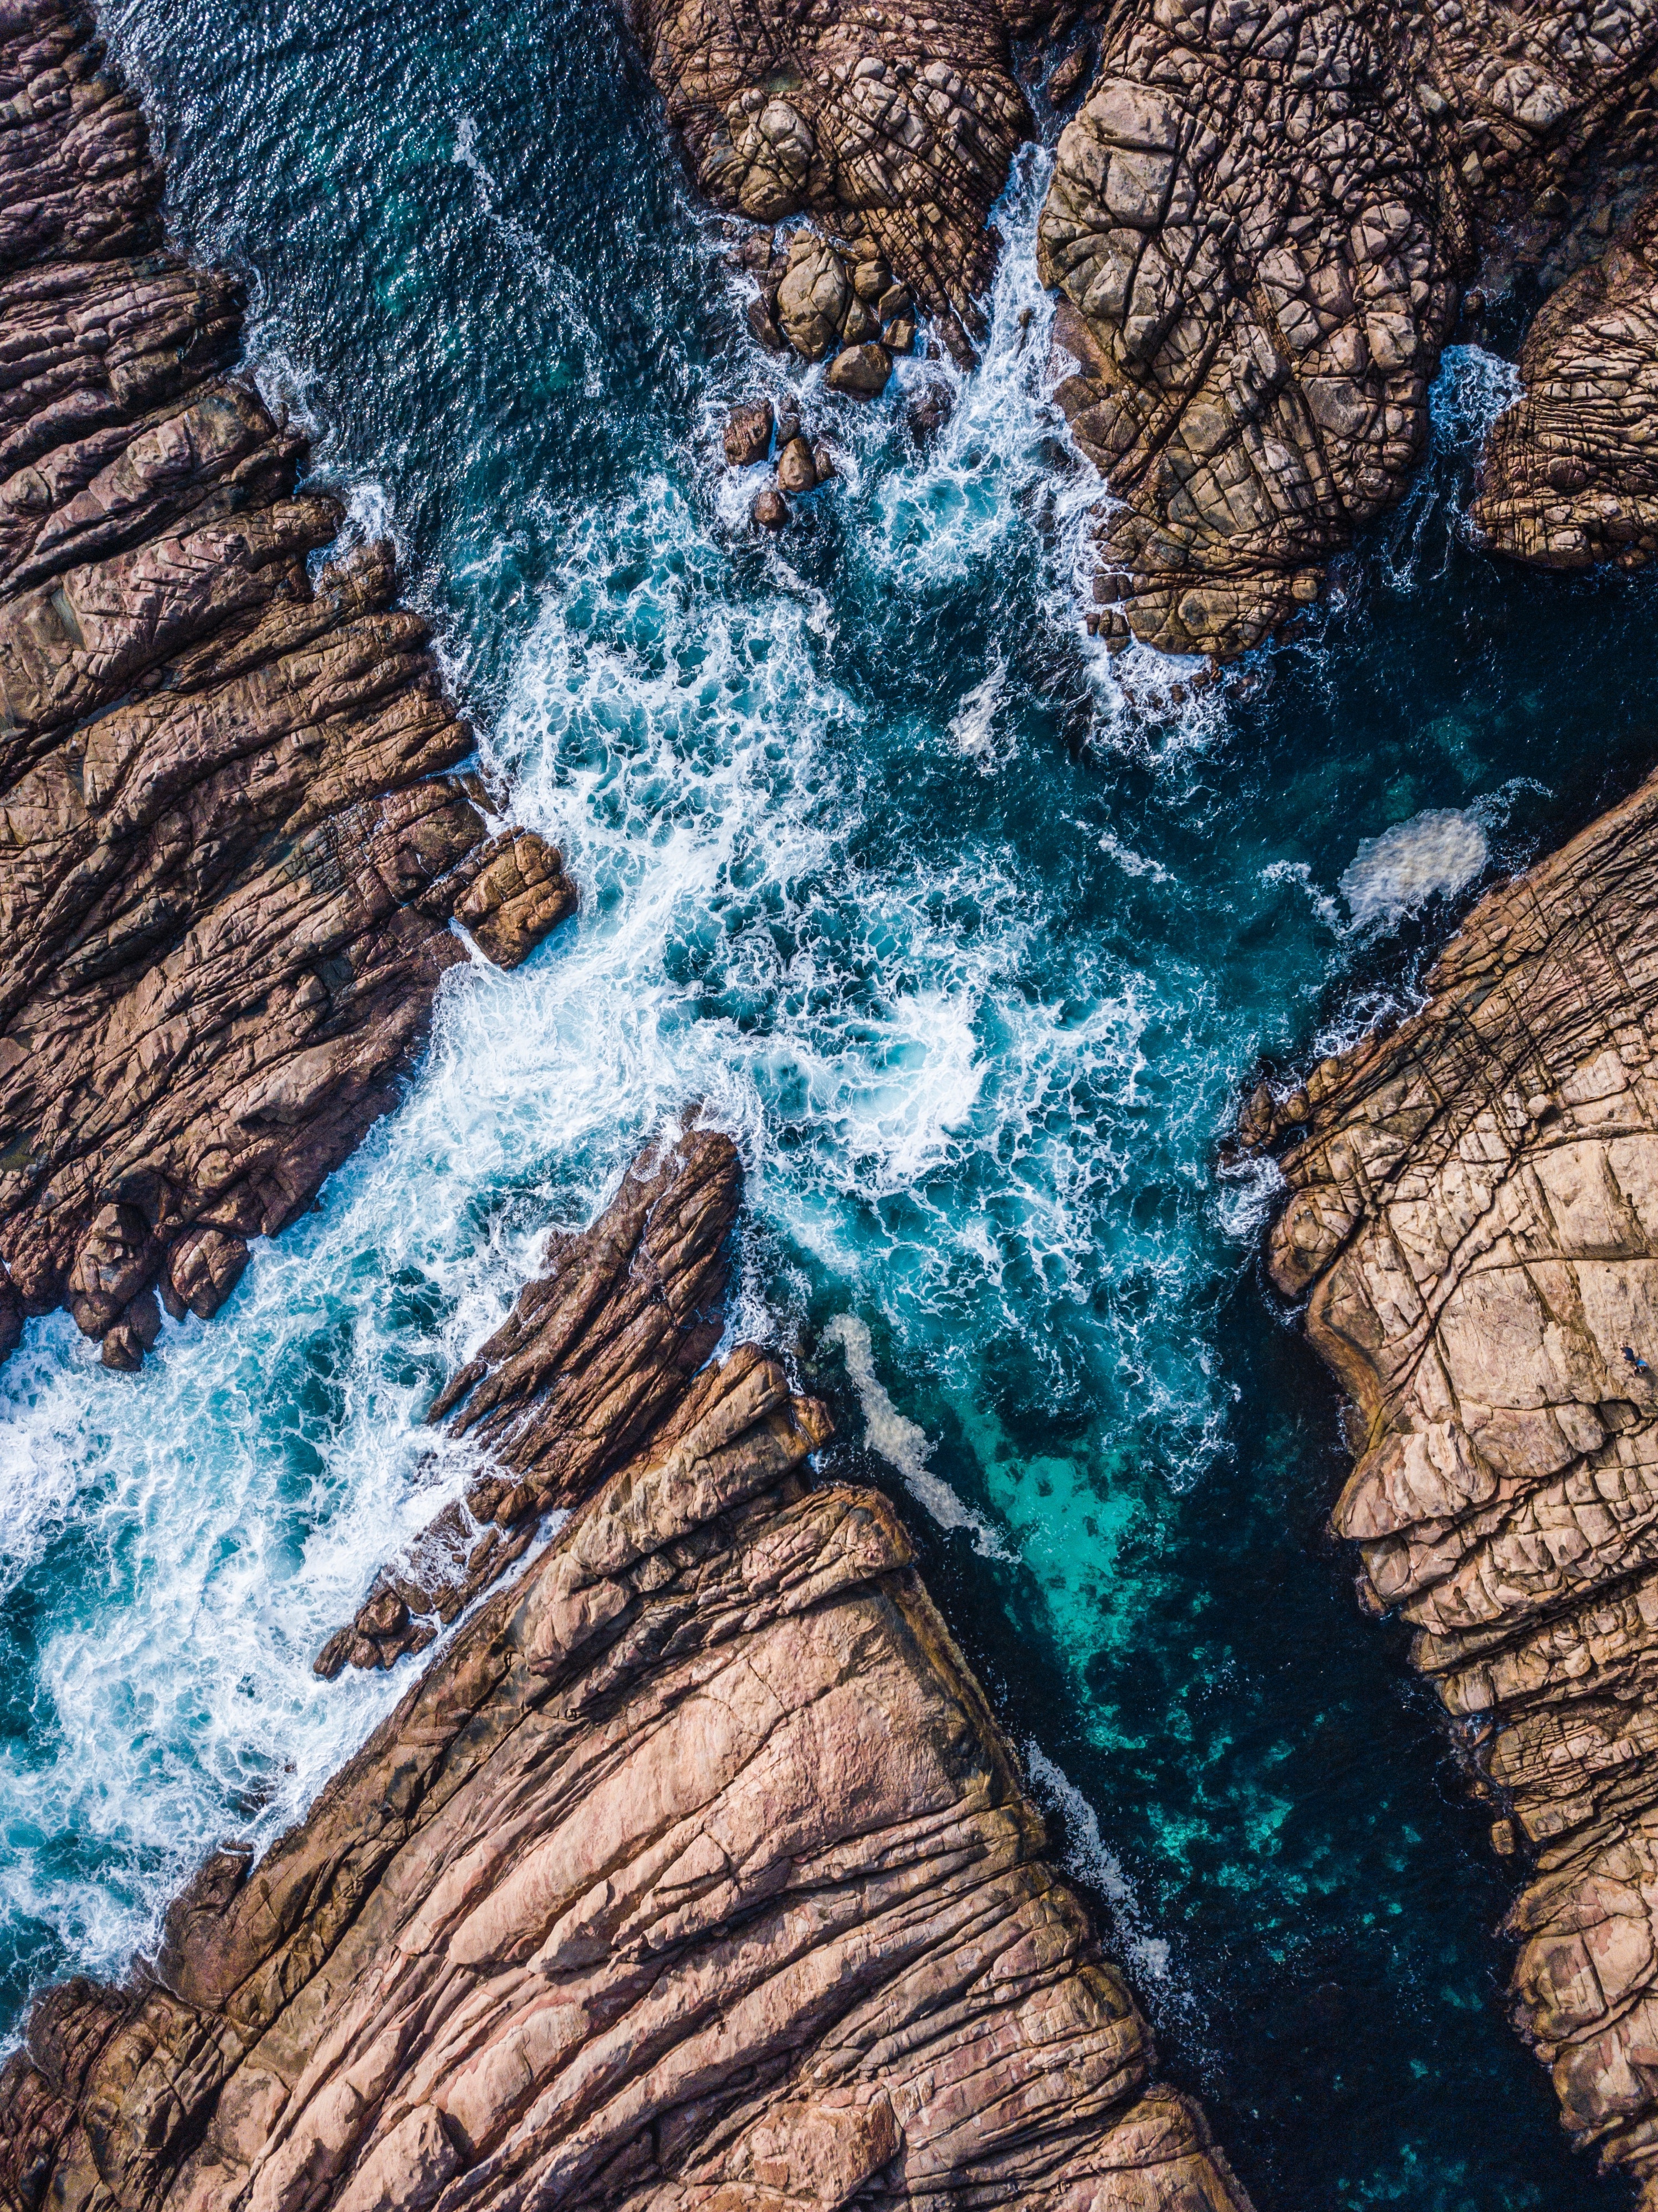 splash, waves, view from above, nature, rocks, ocean cell phone wallpapers